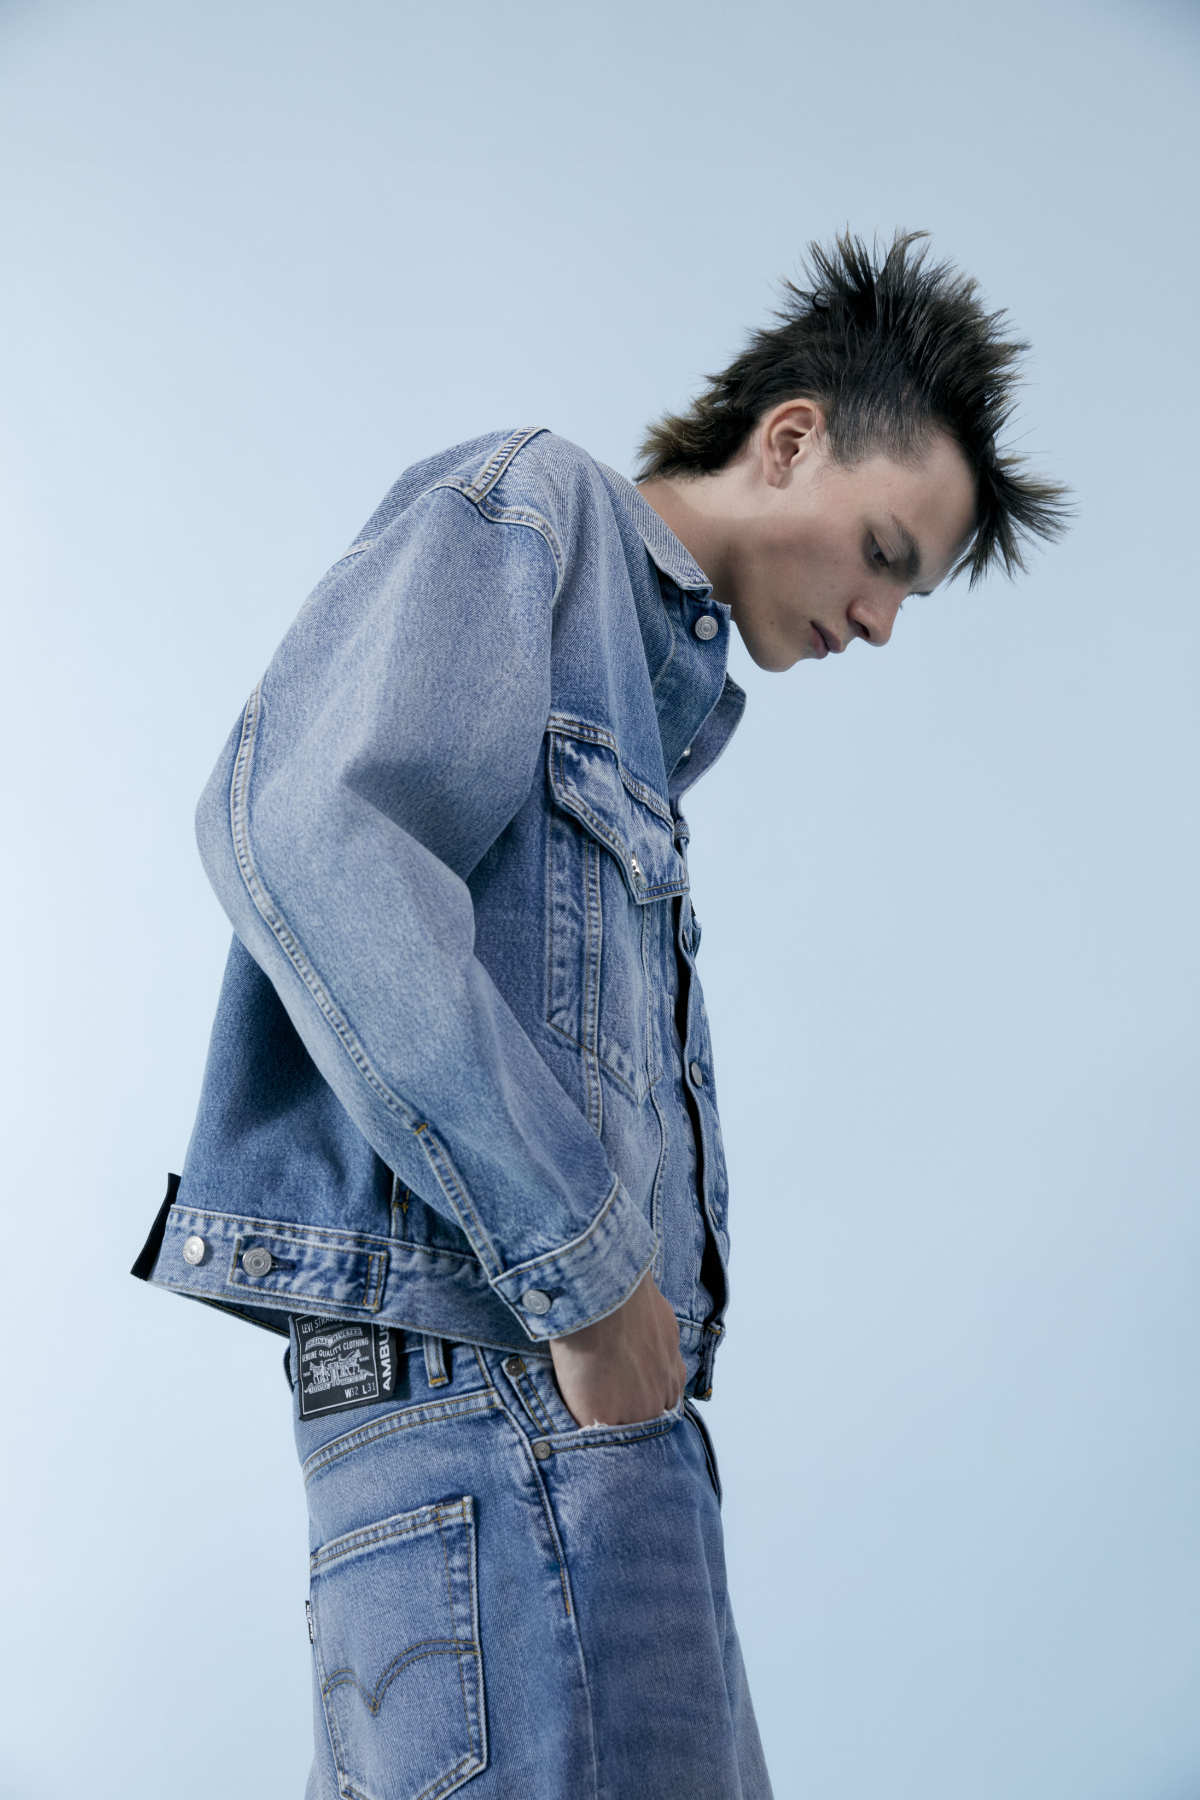 Levi’s® And AMBUSH® Mix Luxury, Streetwear, And Denim For Fall 2022 Collaboration